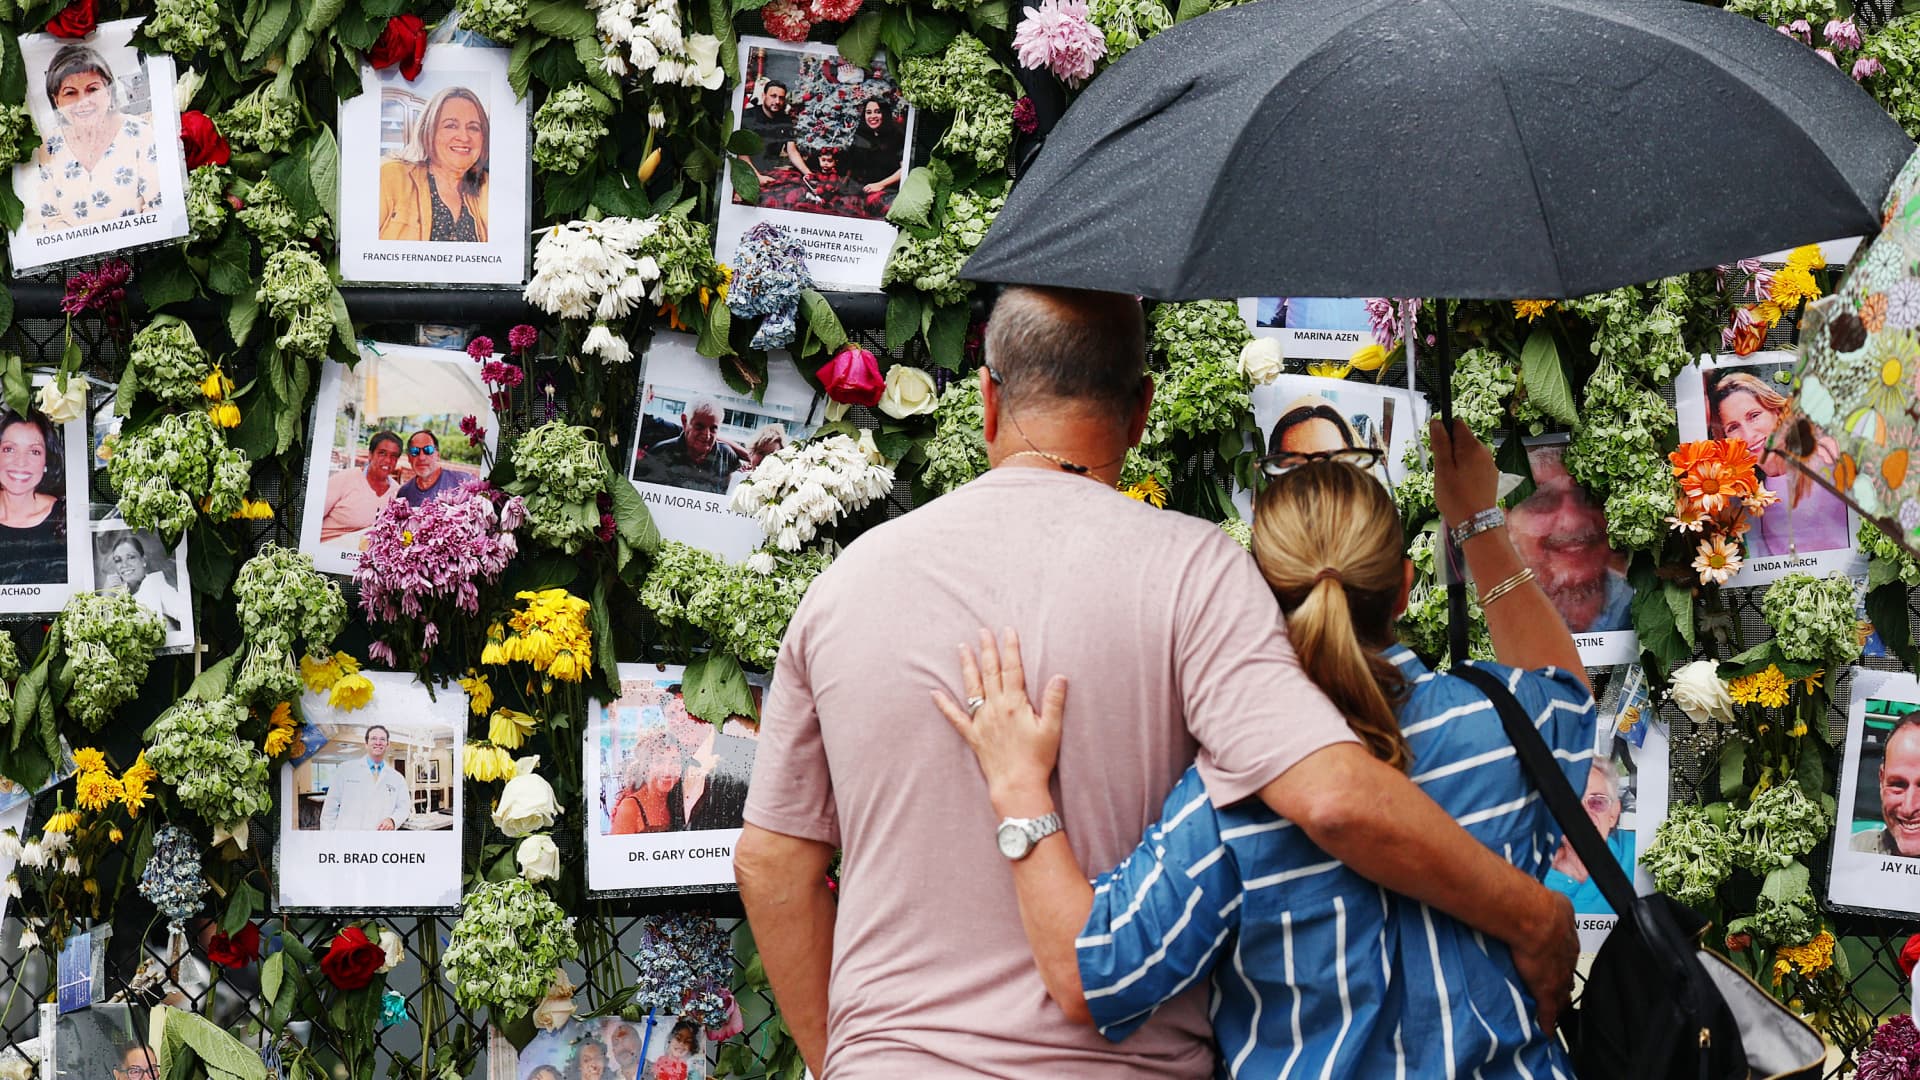 People look at a memorial that has pictures of some of the missing from the partially collapsed 12-story Champlain Towers South condo building on June 30, 2021 in Surfside, Florida.